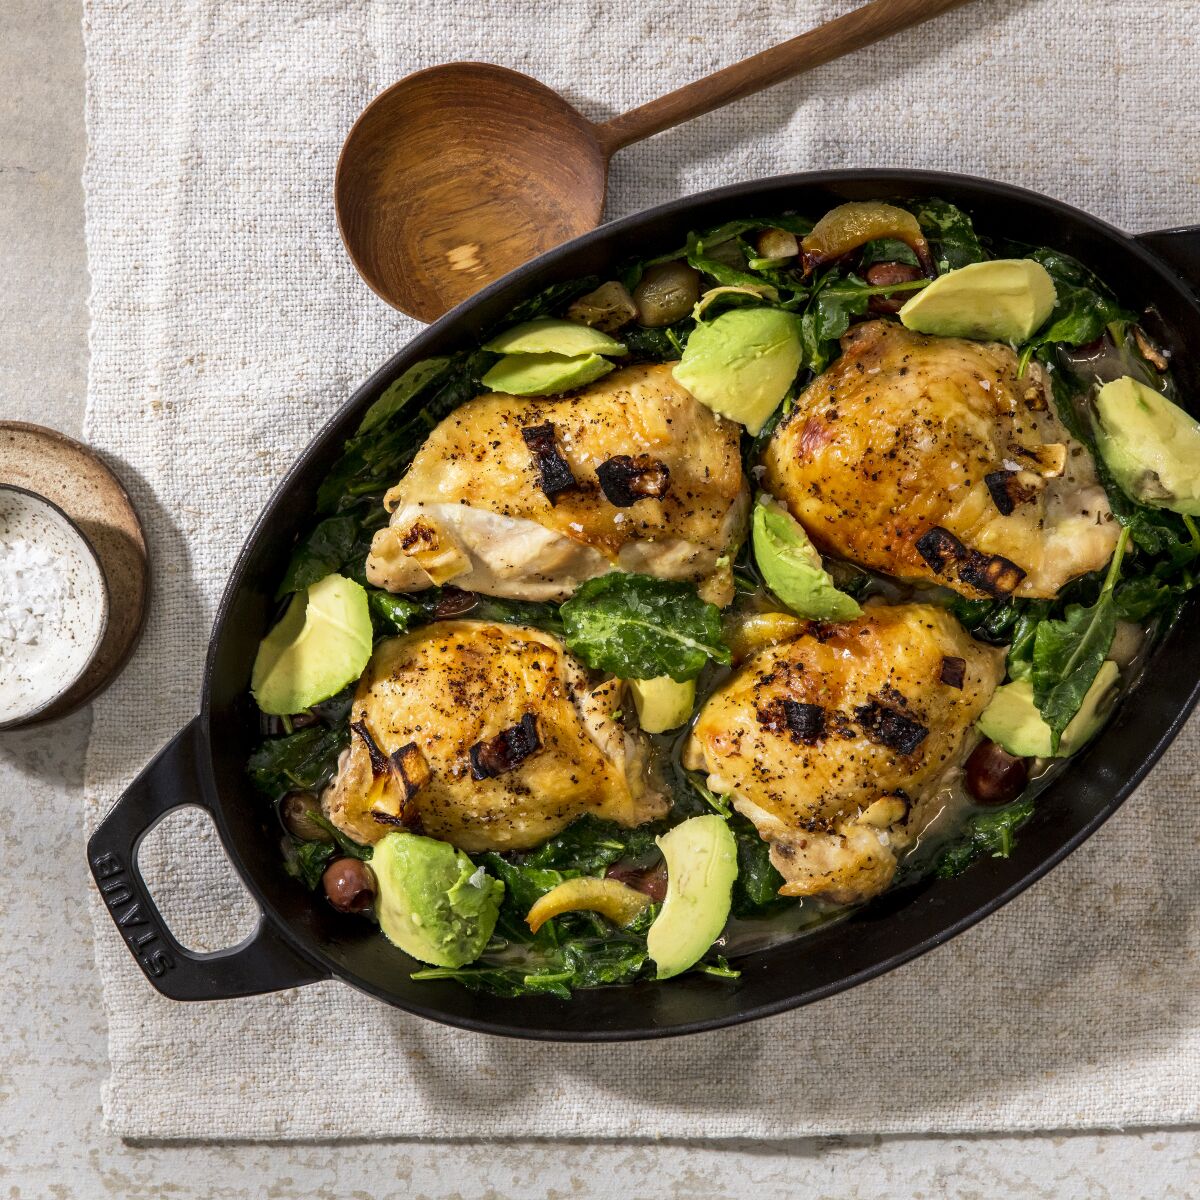 A keto recipe for Ben Mims' cooking series, an olive-brine baked chicken with kale and avocado